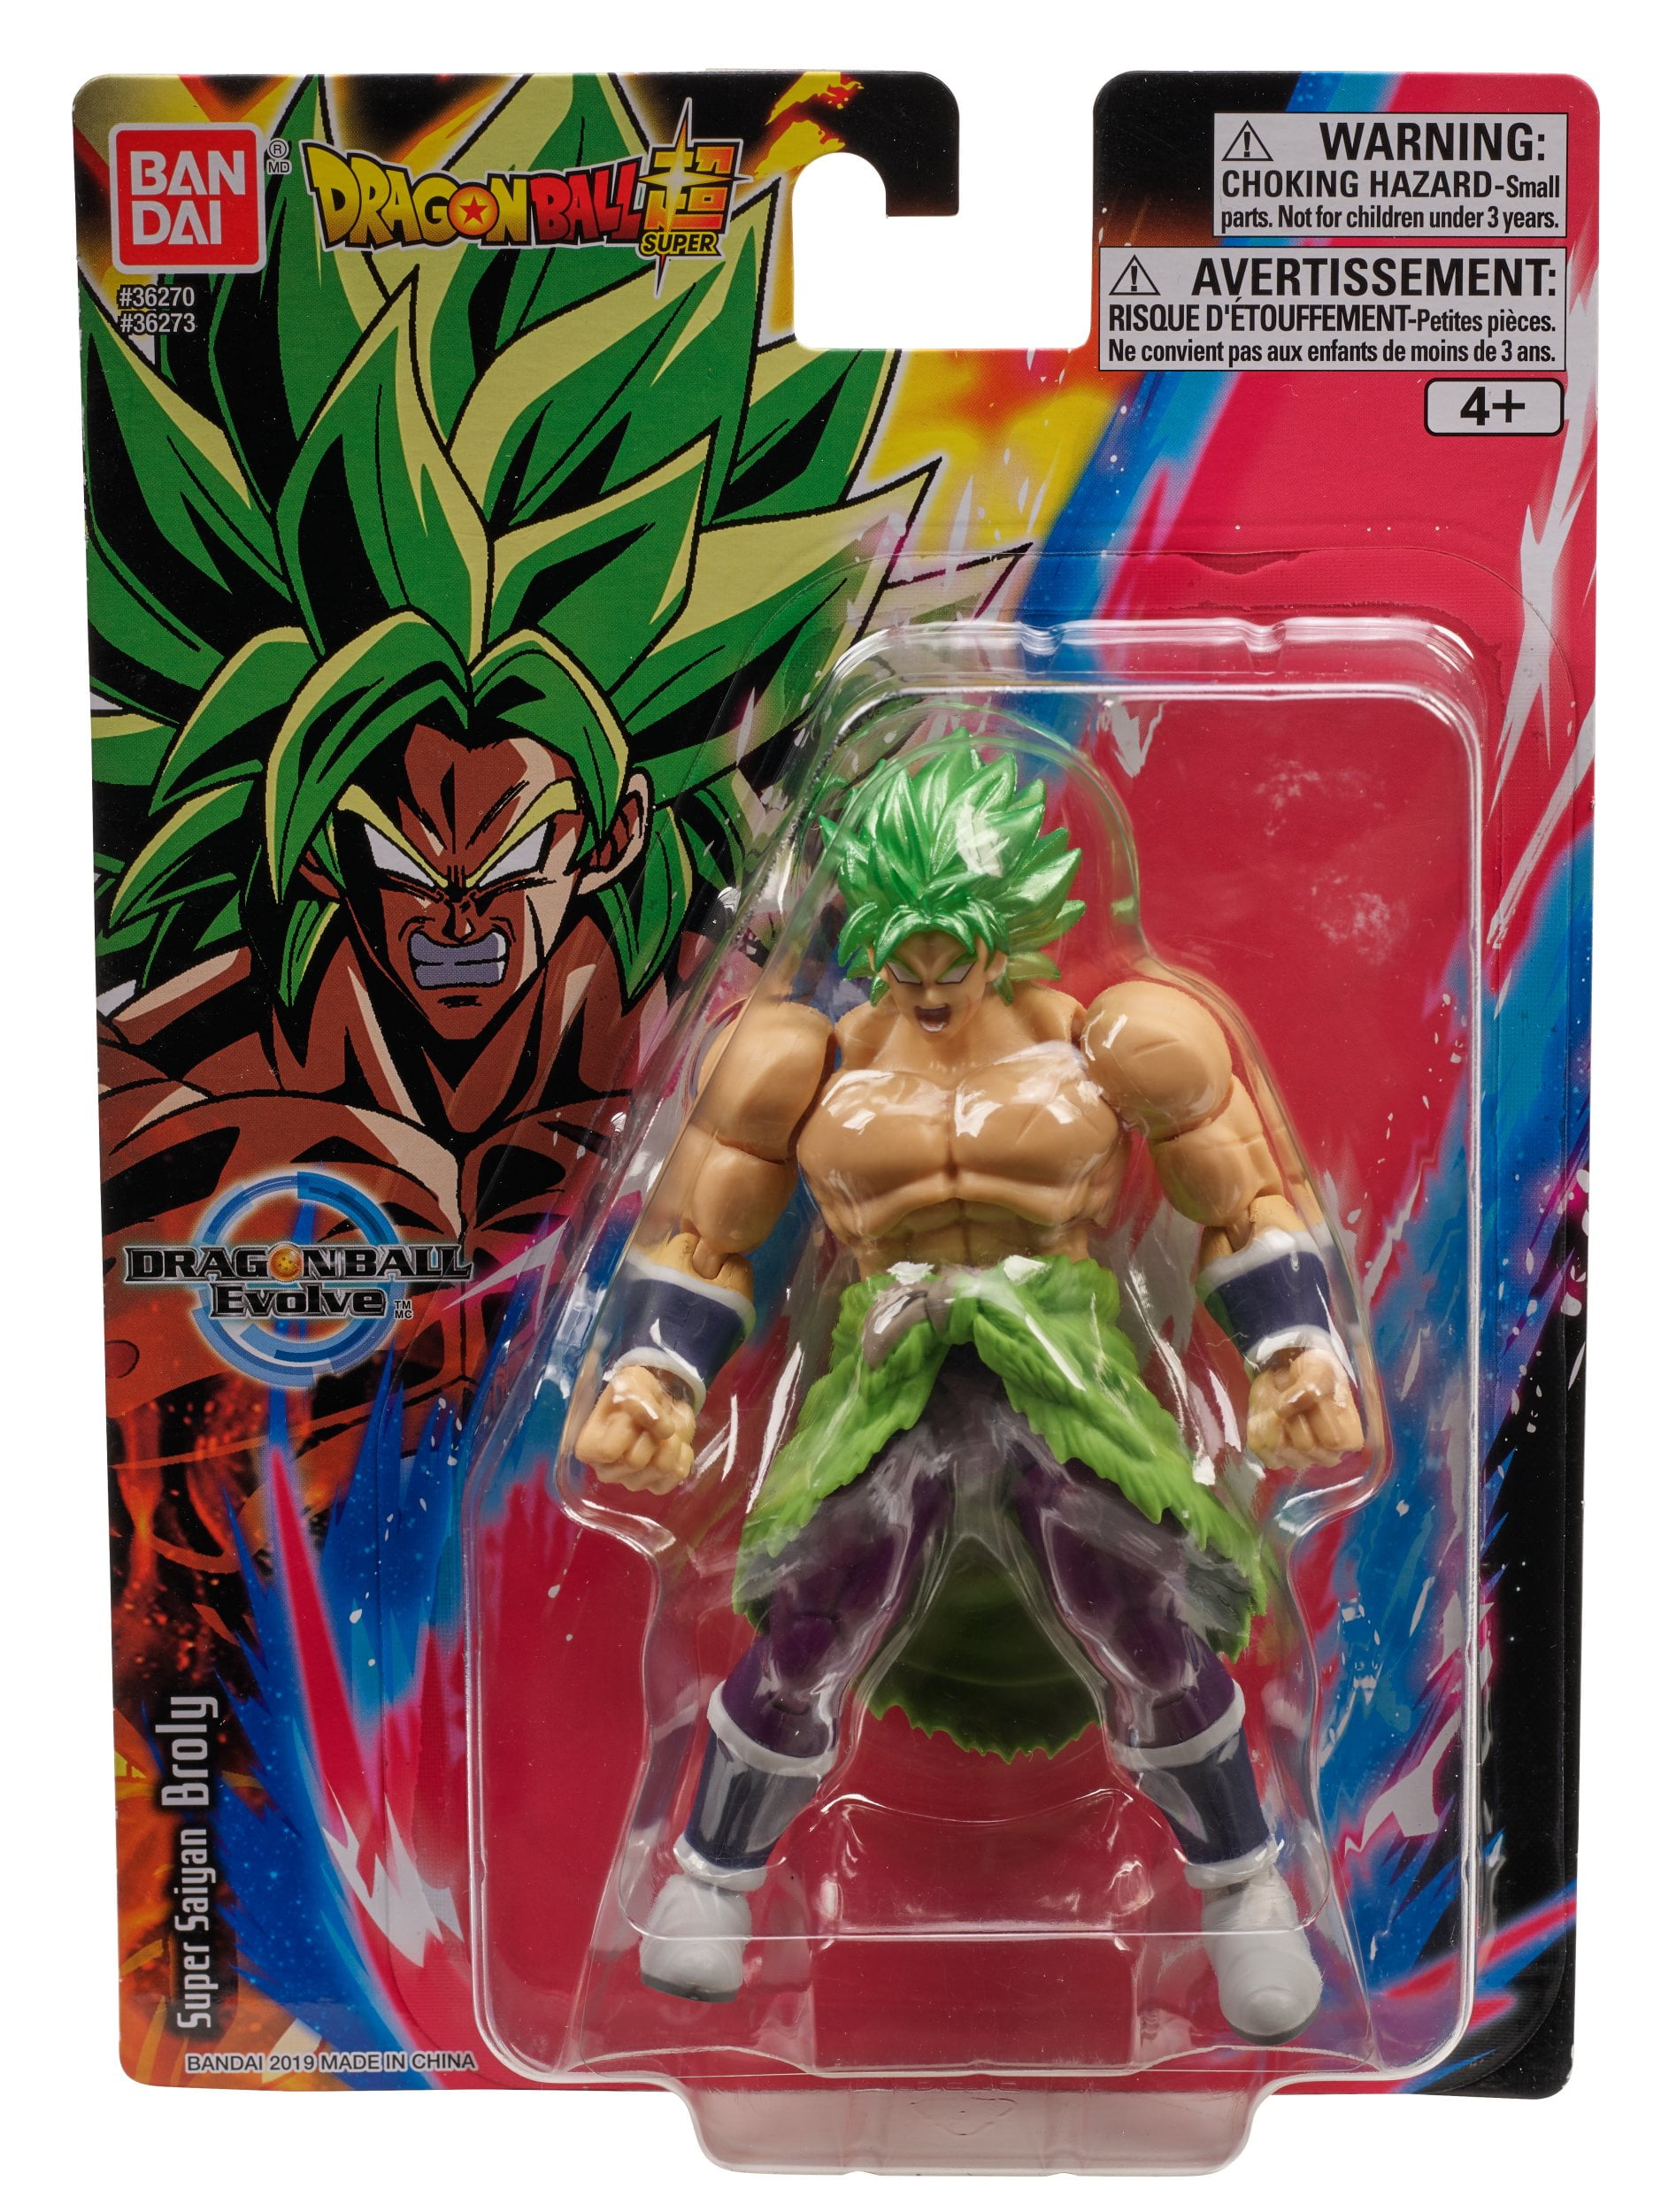 Dragon Ball Evolve Super Saiyan Broly 5 in Action Figure Bandai TOEI Anime 2019 for sale online 